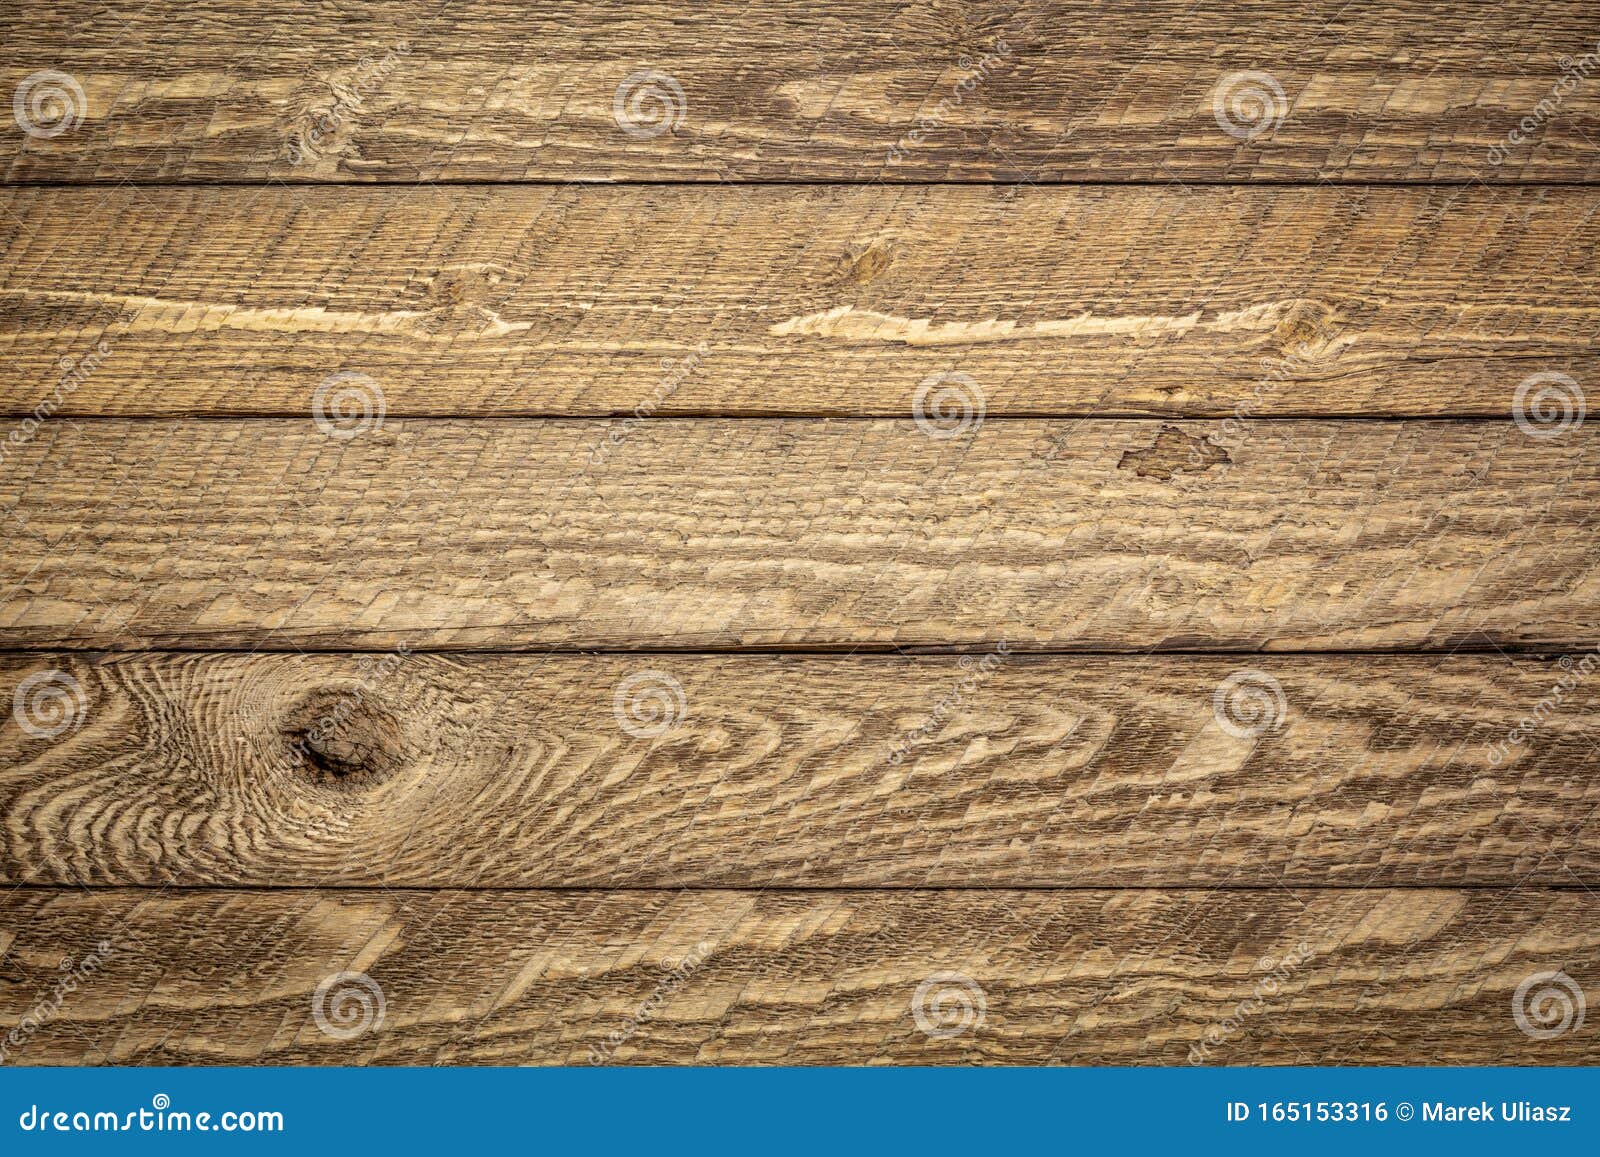 Weathered And Rustic Barn Wood Background Stock Photo Image Of